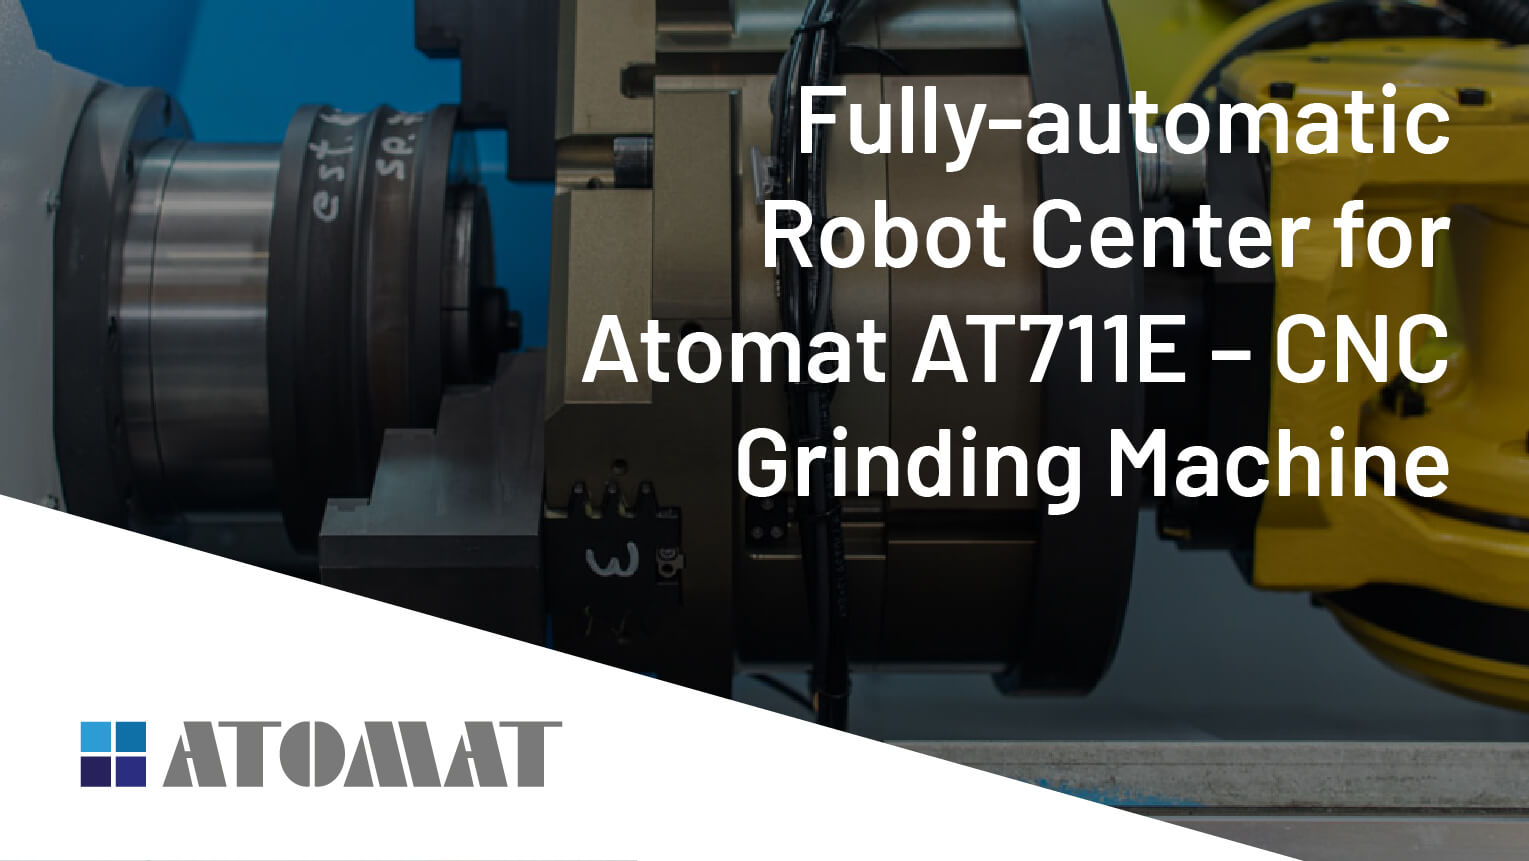 Fully-automatic Robot Center for Atomat AT711E CNC Grinding Machine 